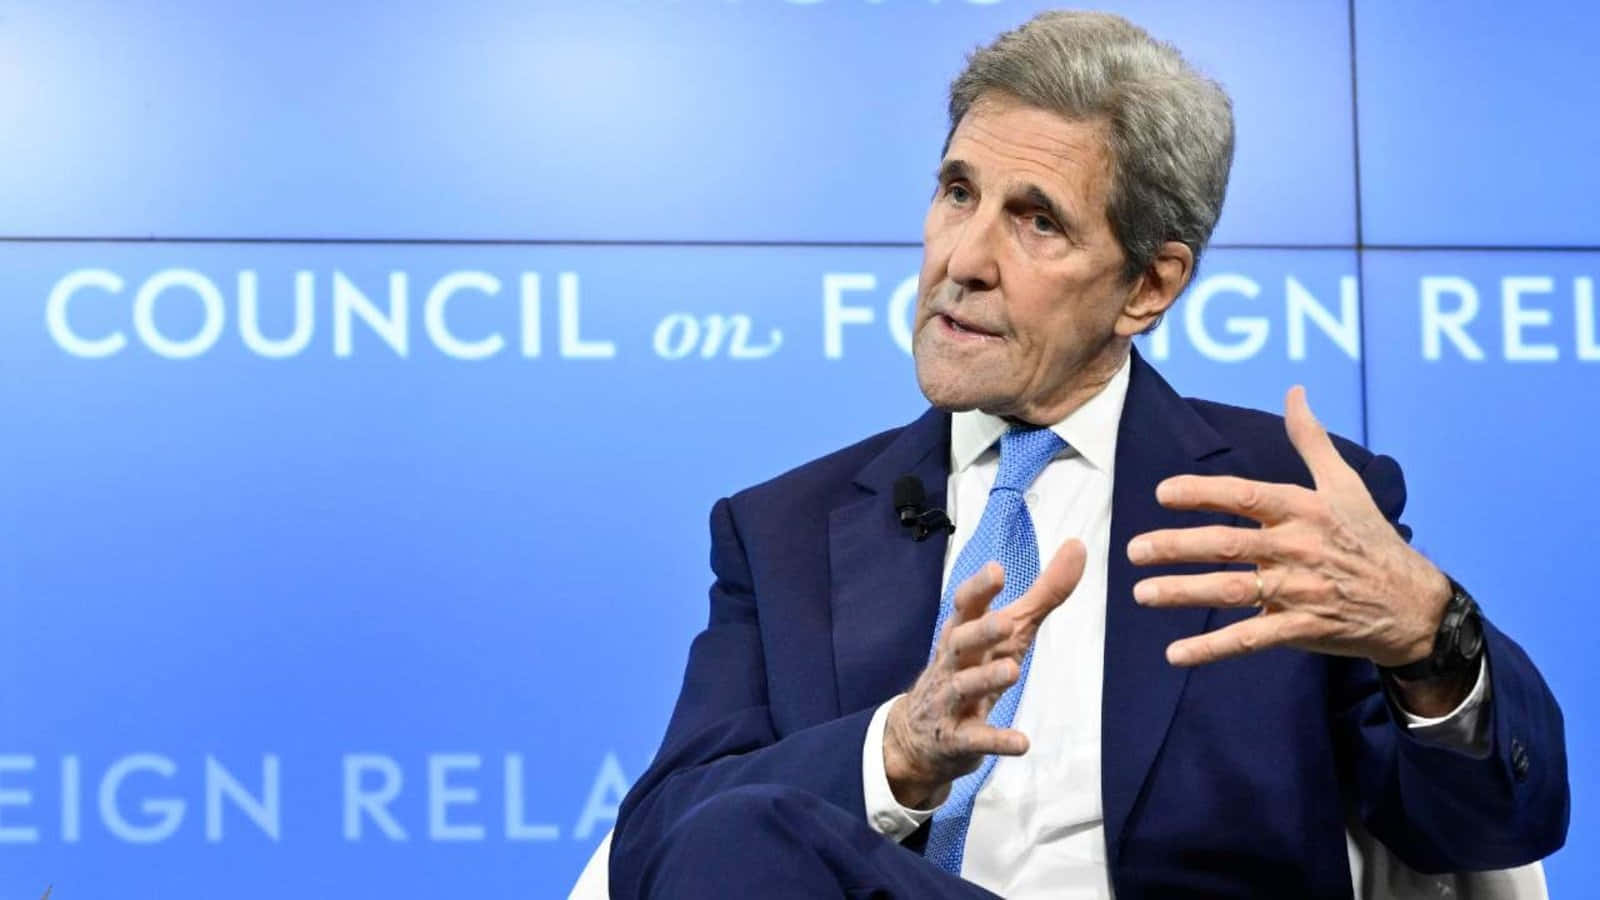 John Kerry On Council And Foreign Relations Event Wallpaper